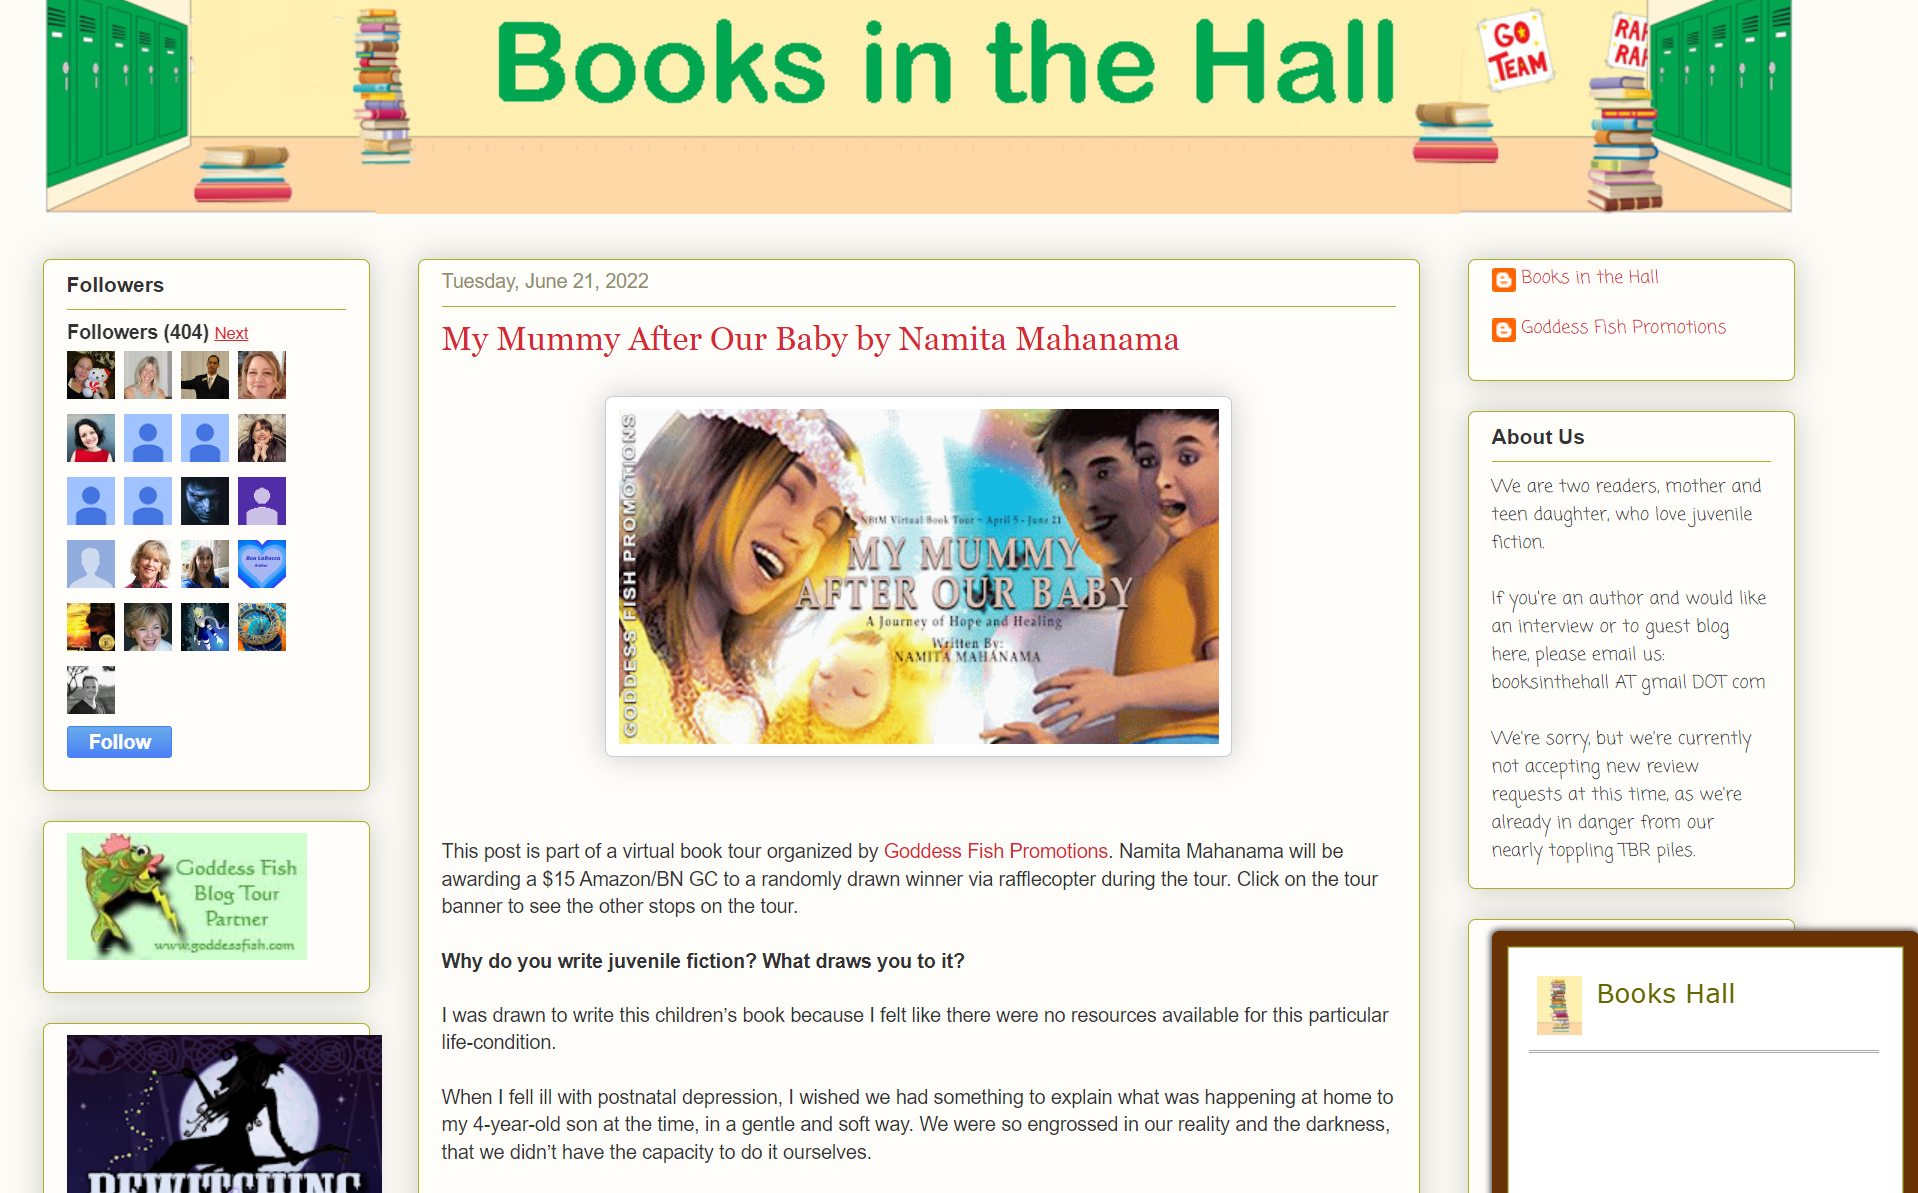 FEATURED IN BOOKS IN THE HALL BLOG POST